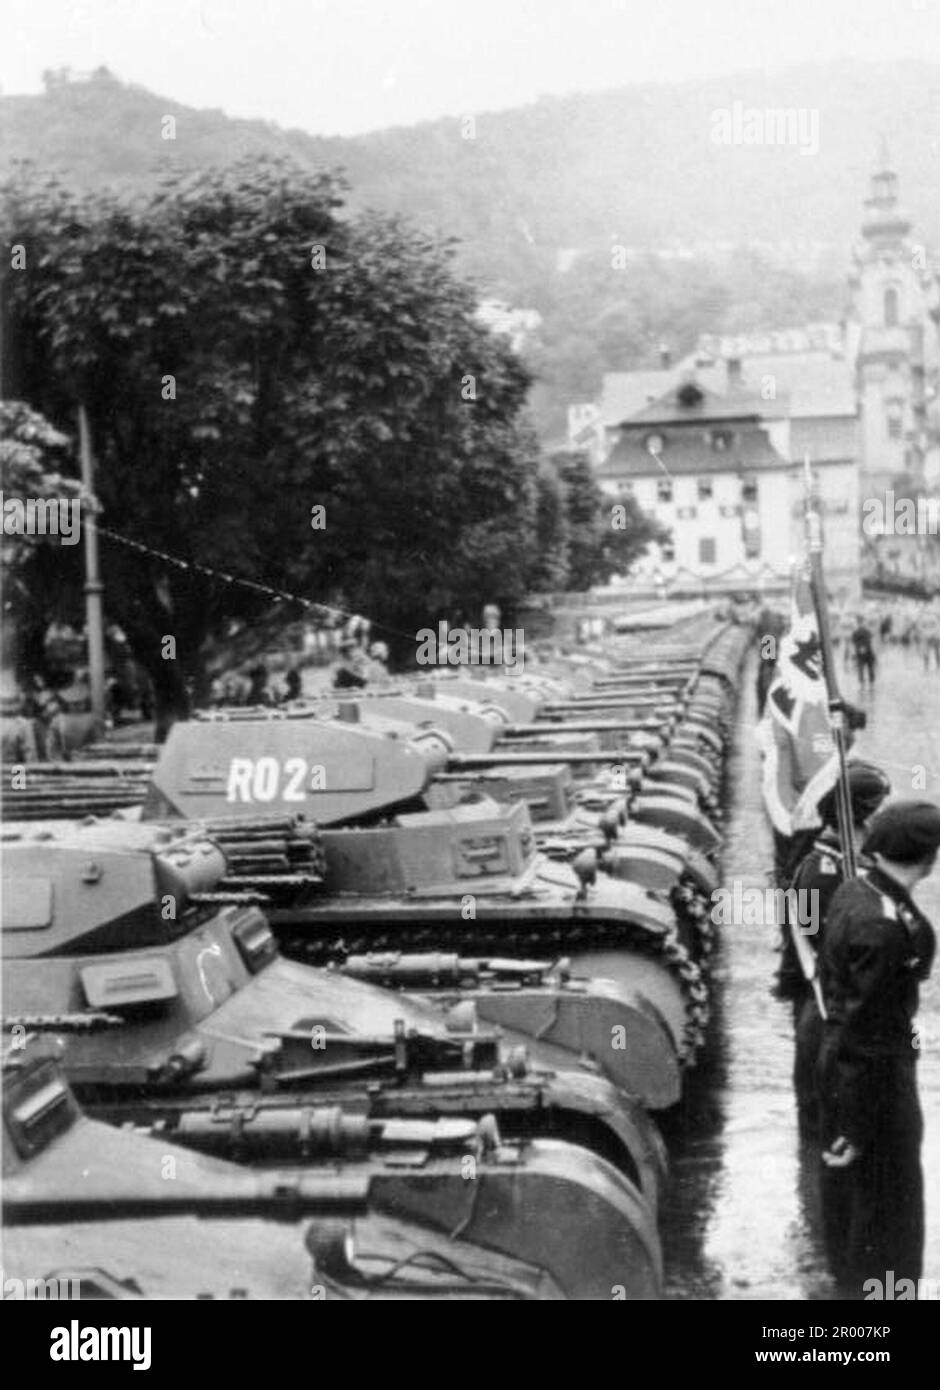 A parade of tanks in the town square of Karlsbad in Czechoslovakia in October 1938 after the annexation of the Sudetenland. After the annexation of Austria, Hitler demanded that he be given the Sudeten region of Czechoslovakia. At the Munich conference in September 1938 the Western powers agreed to this and the nazis occupied the area. Not long after Hitler broke his promise and invaded the rest of Czechoslovakia before turning his attention to Poland. Bundesarchiv, Bild 146-2005-0178 / CC-BY-SA 3.0 Stock Photo